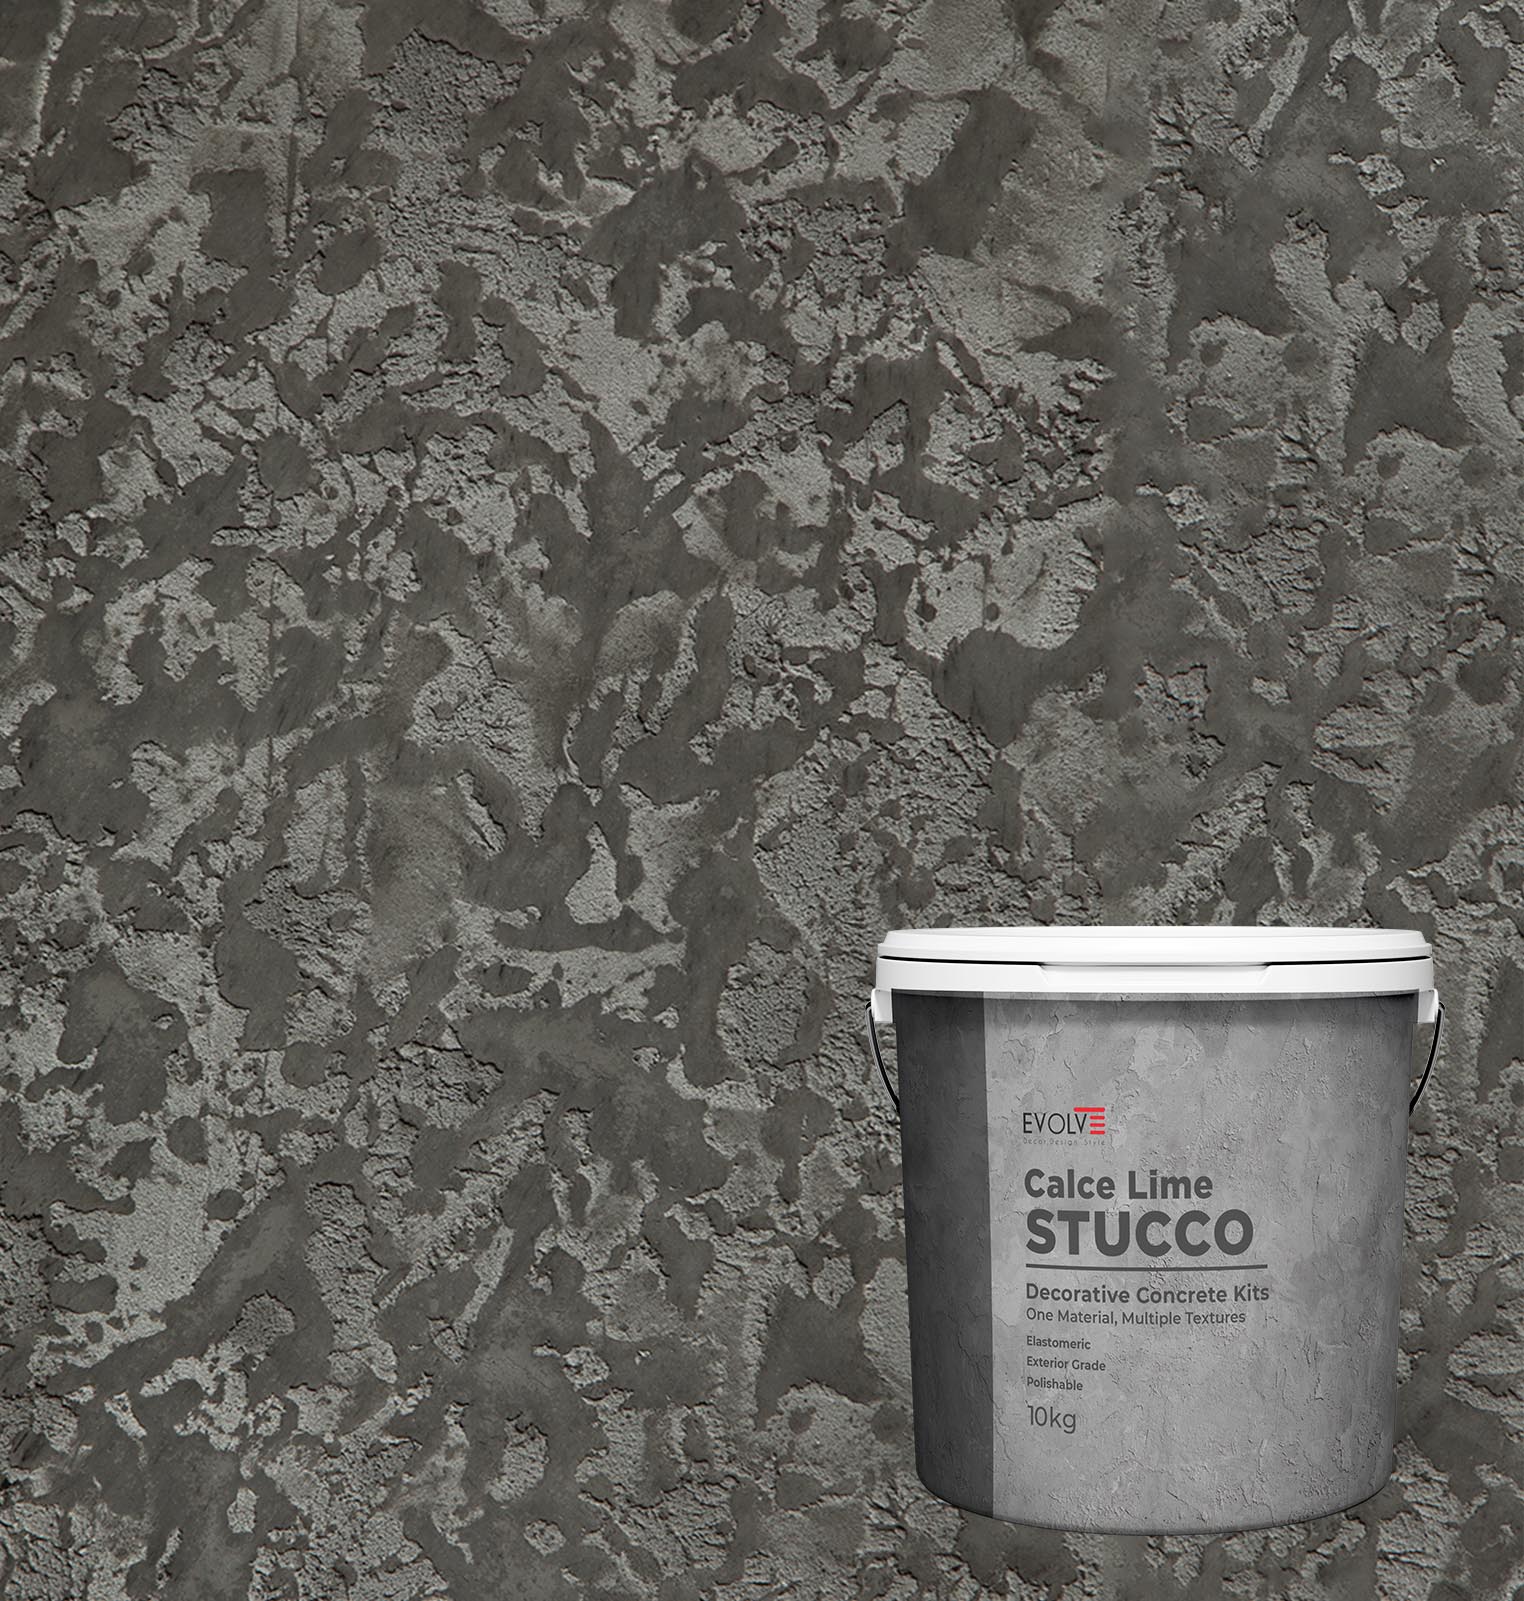 Calce Lime Stucco Concrete Material Kit